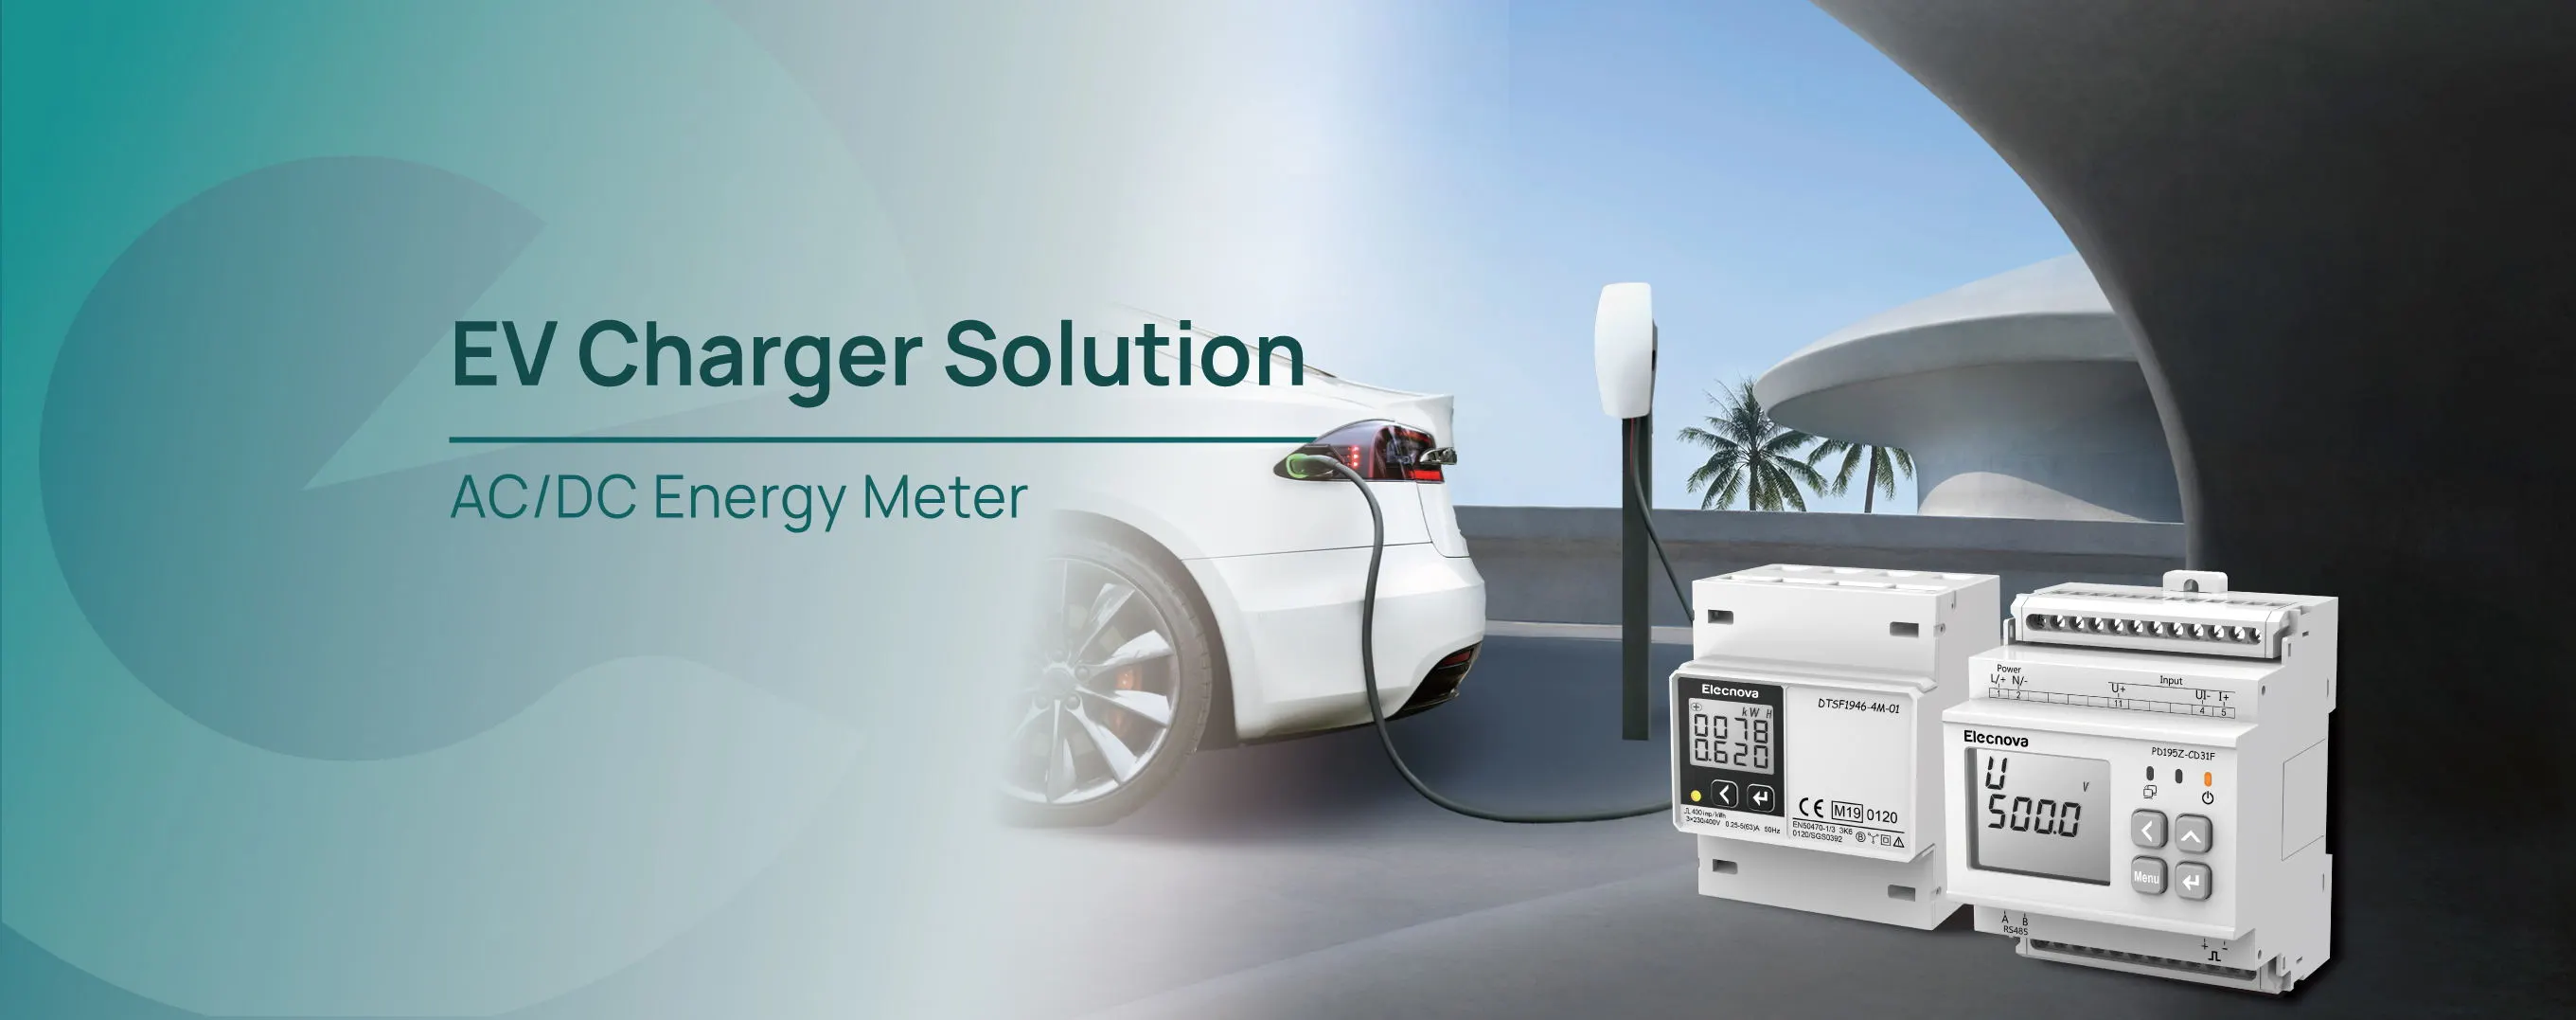 ev charger solution sfere dc energy meter